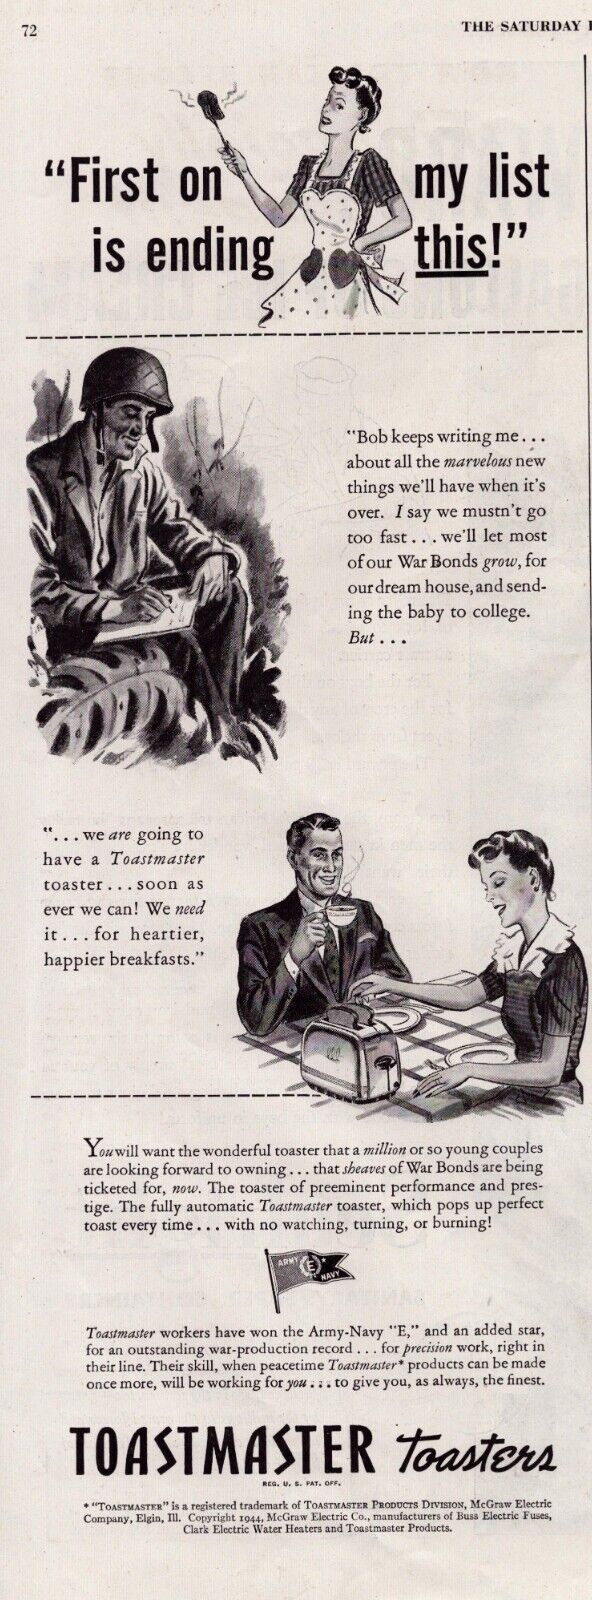 1944 Toastmaster Toaster WWII Print Ad Soldier Writing Wife Home